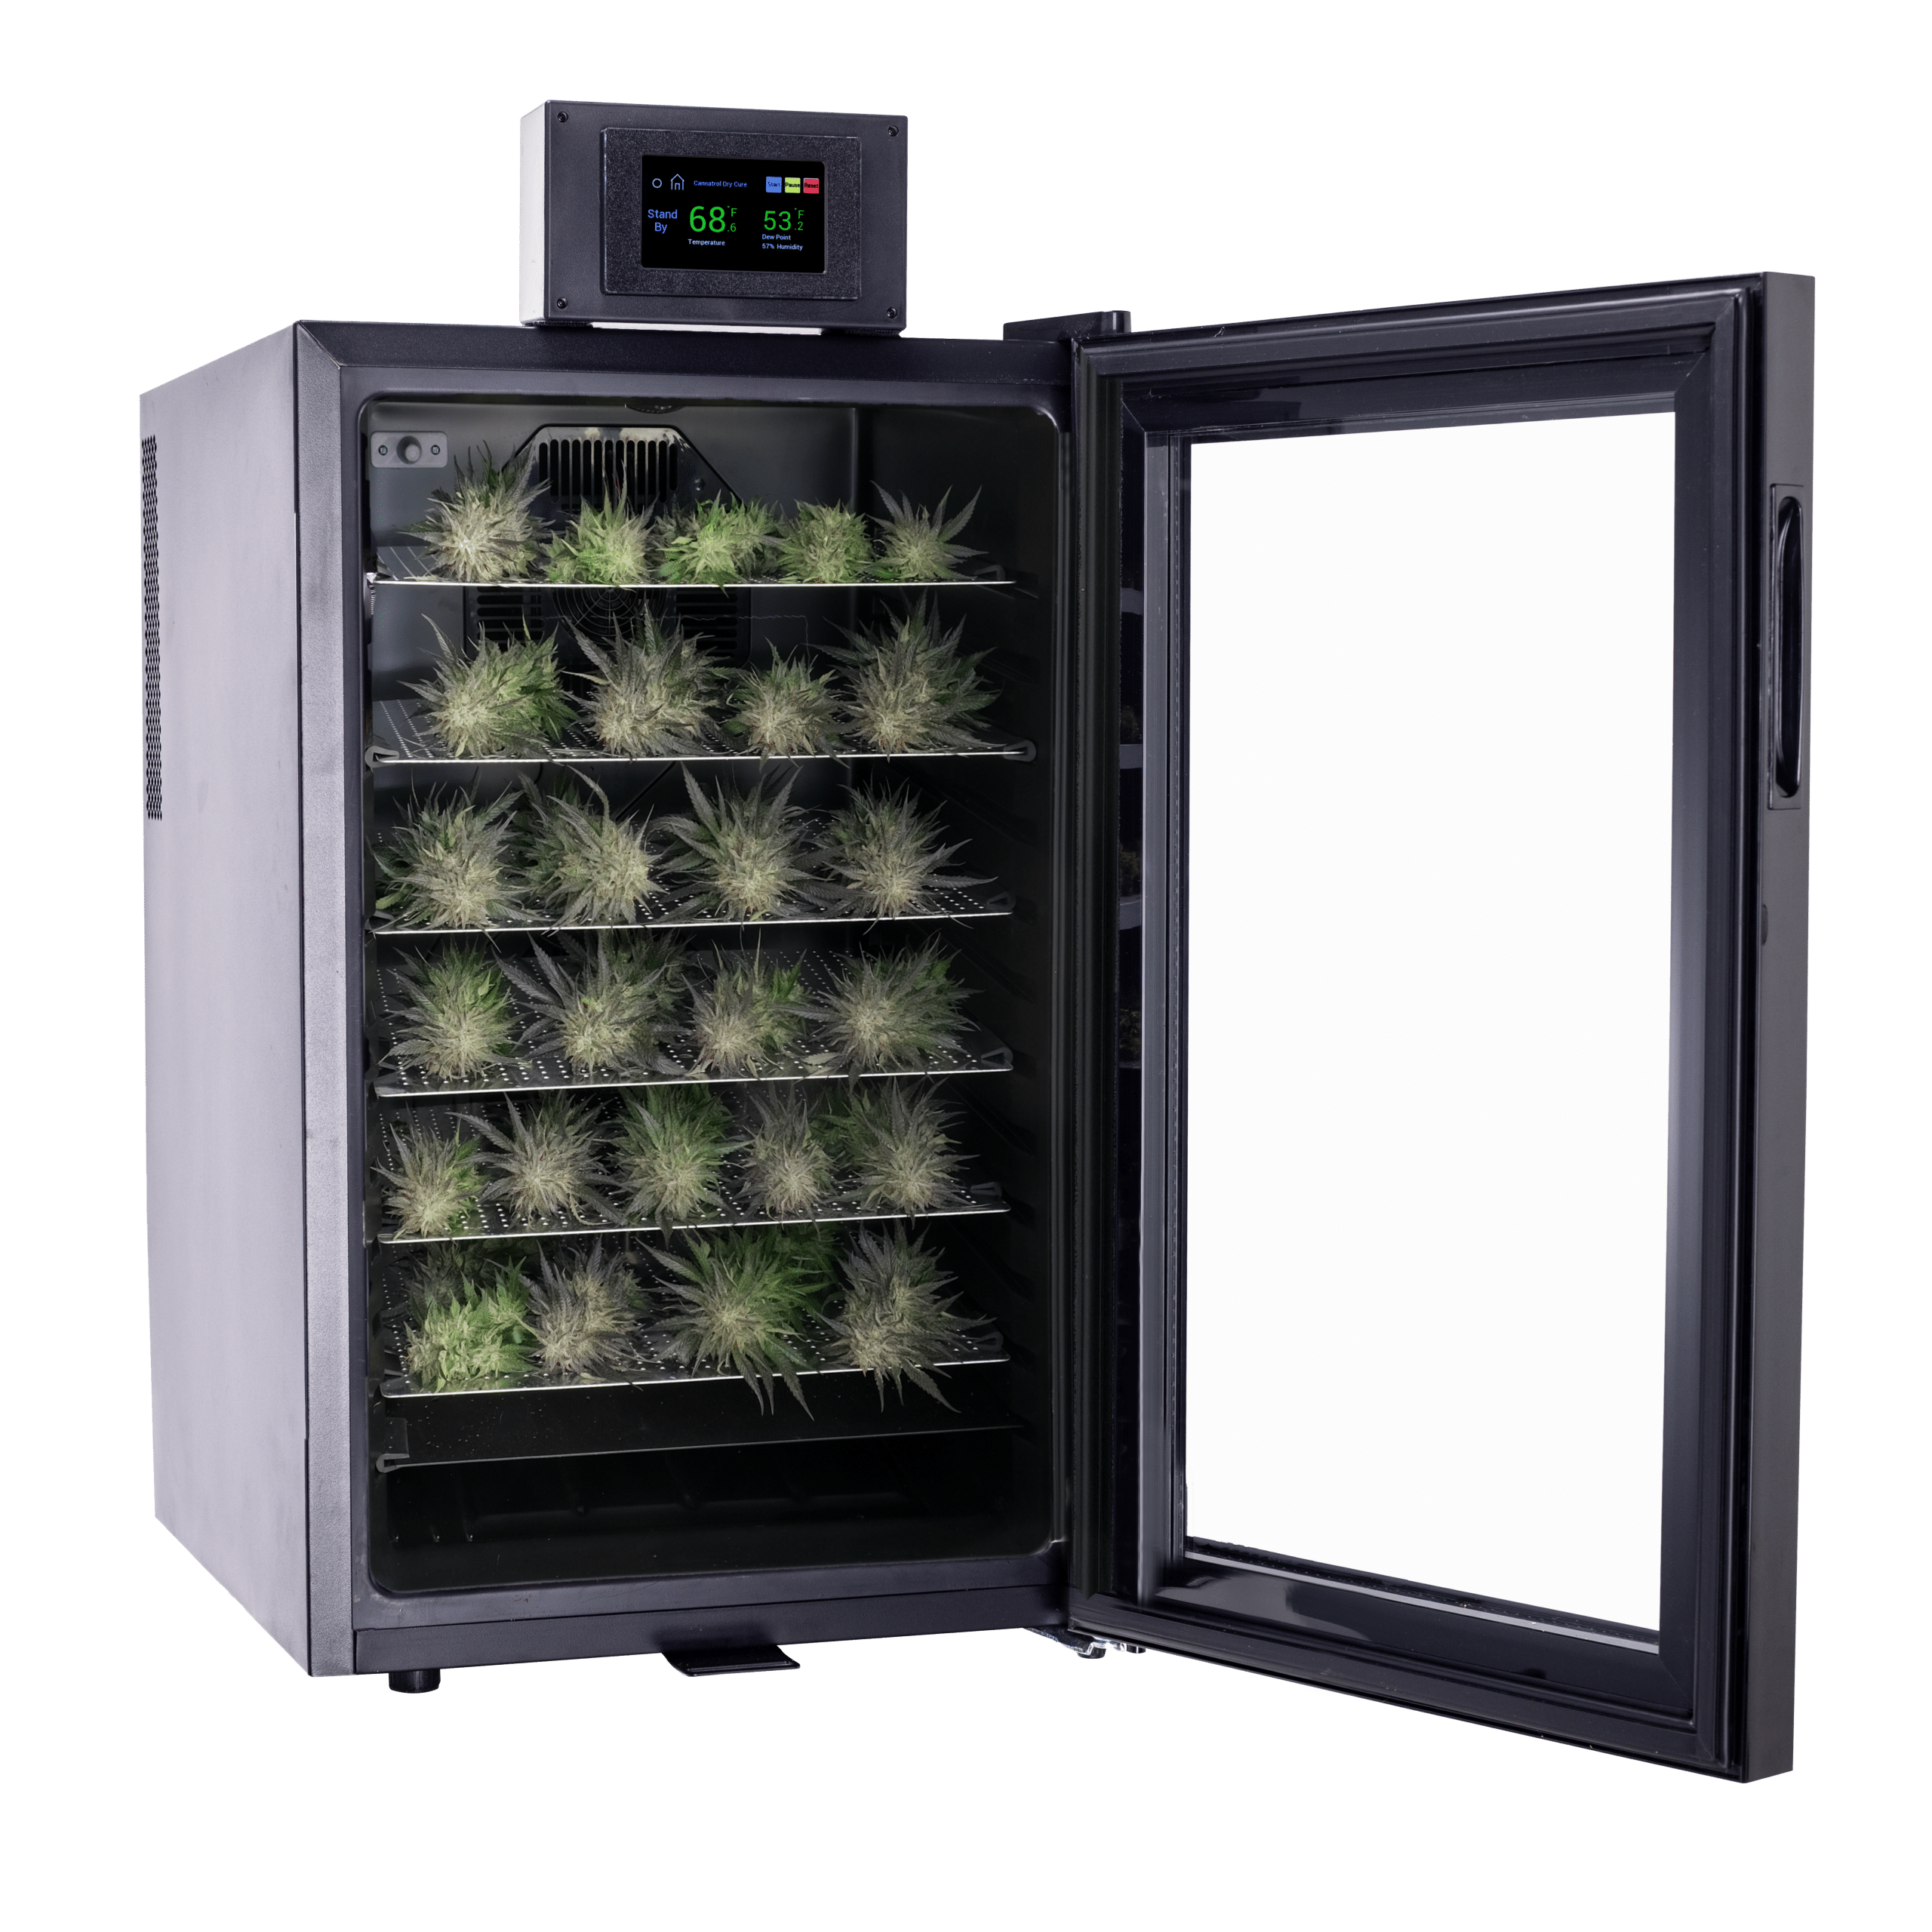 Making Bubble Hash with a Harvest Right Freeze Dryer - Grow Dr. Guides